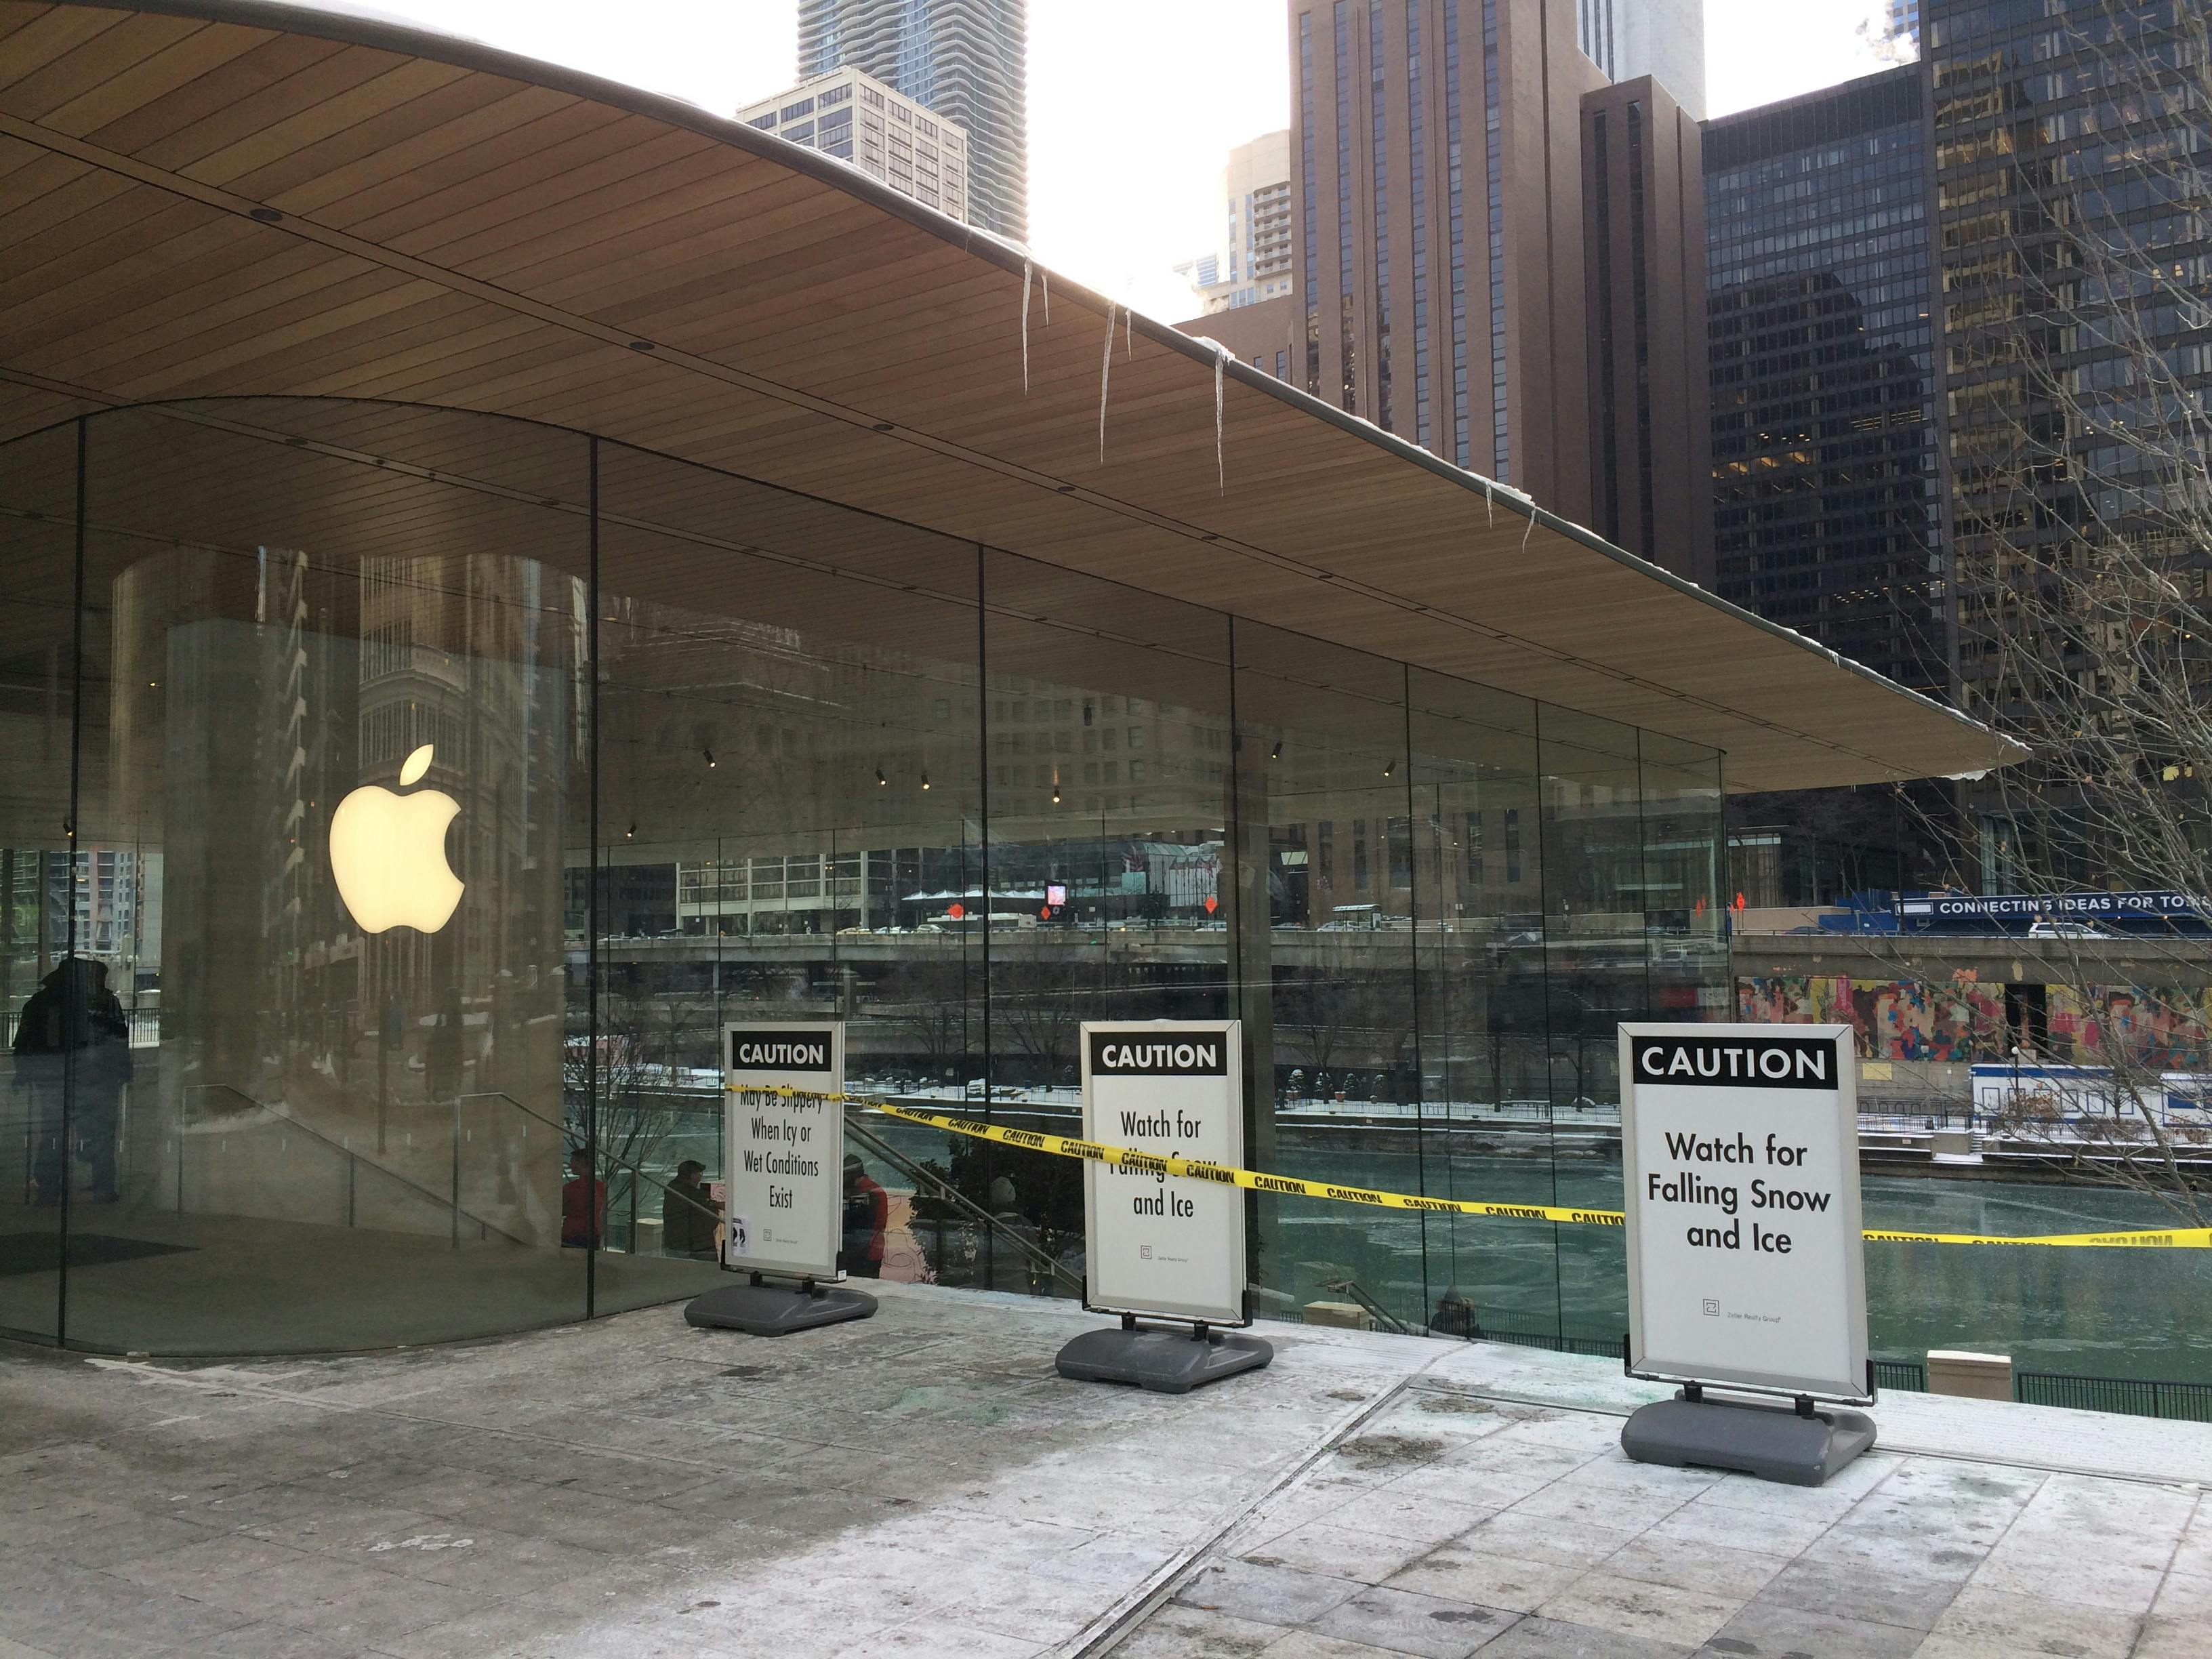 apple stores  architcture and interior design news and projects